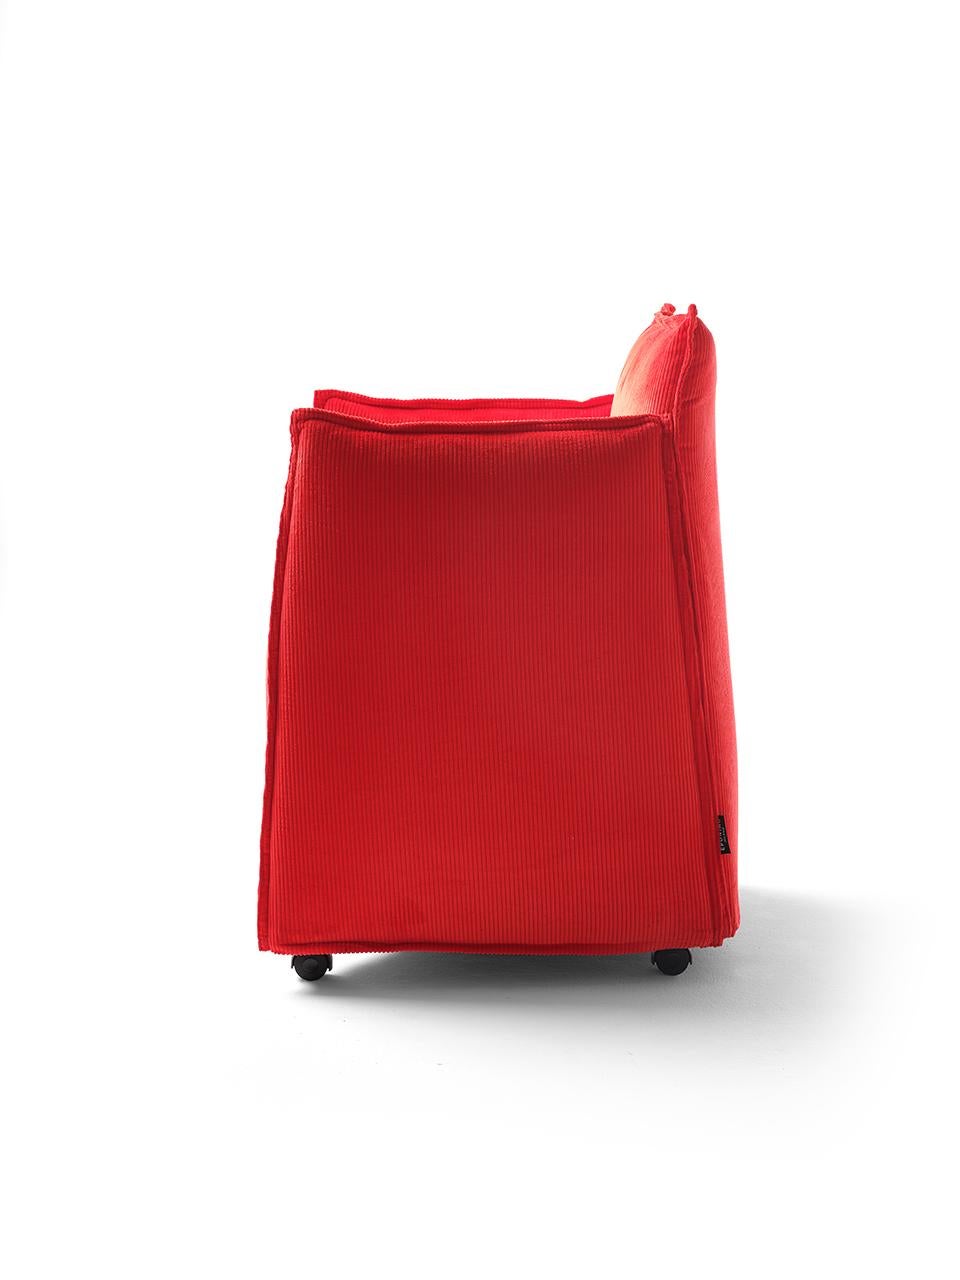 Italian 21st Century Modern Small Textile Armchair In Cotton Corduroy  For Sale